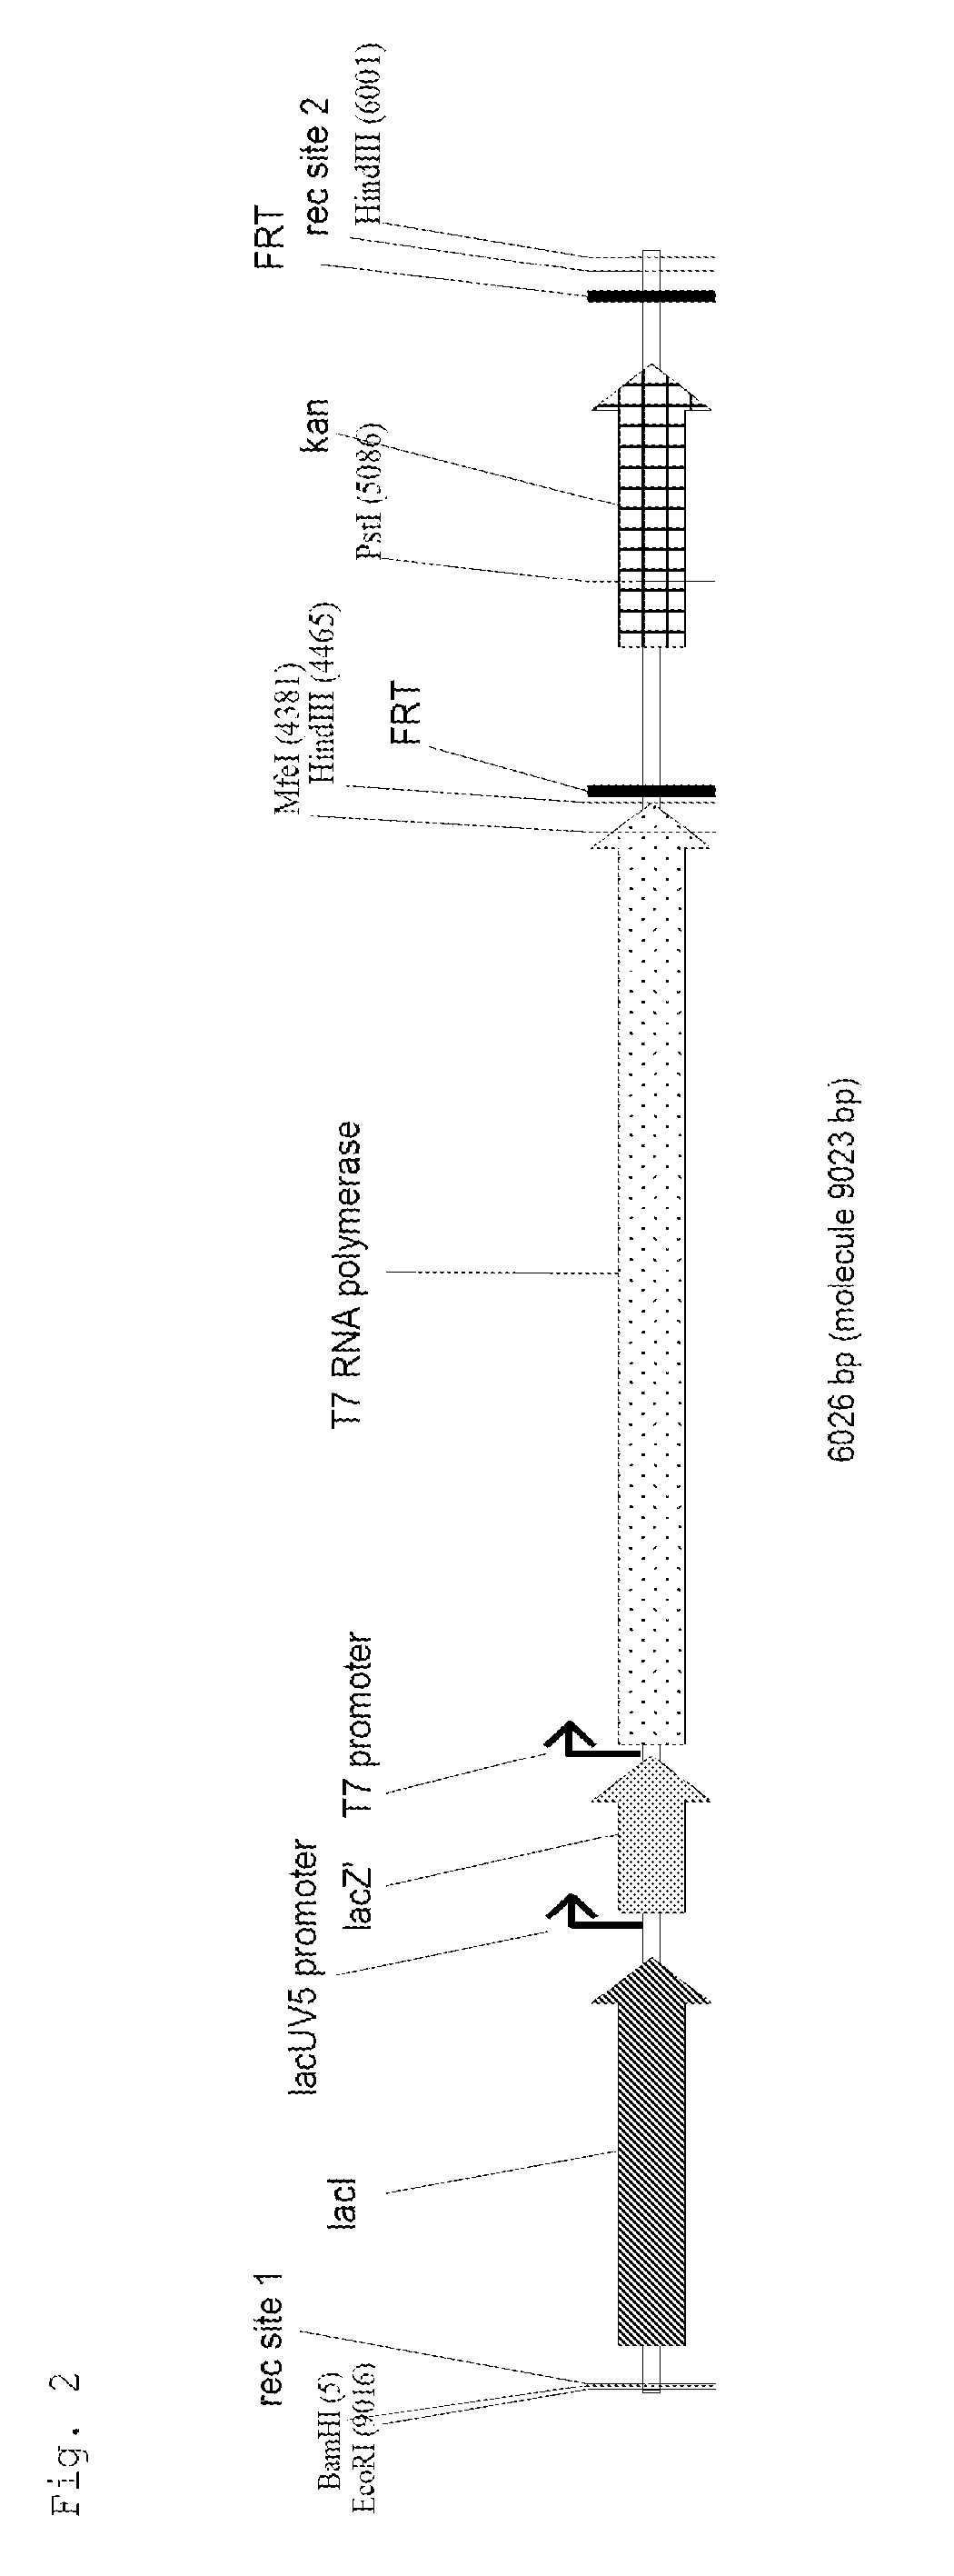 T7 expression system, method for its production and use thereof for producing recombinant proteins